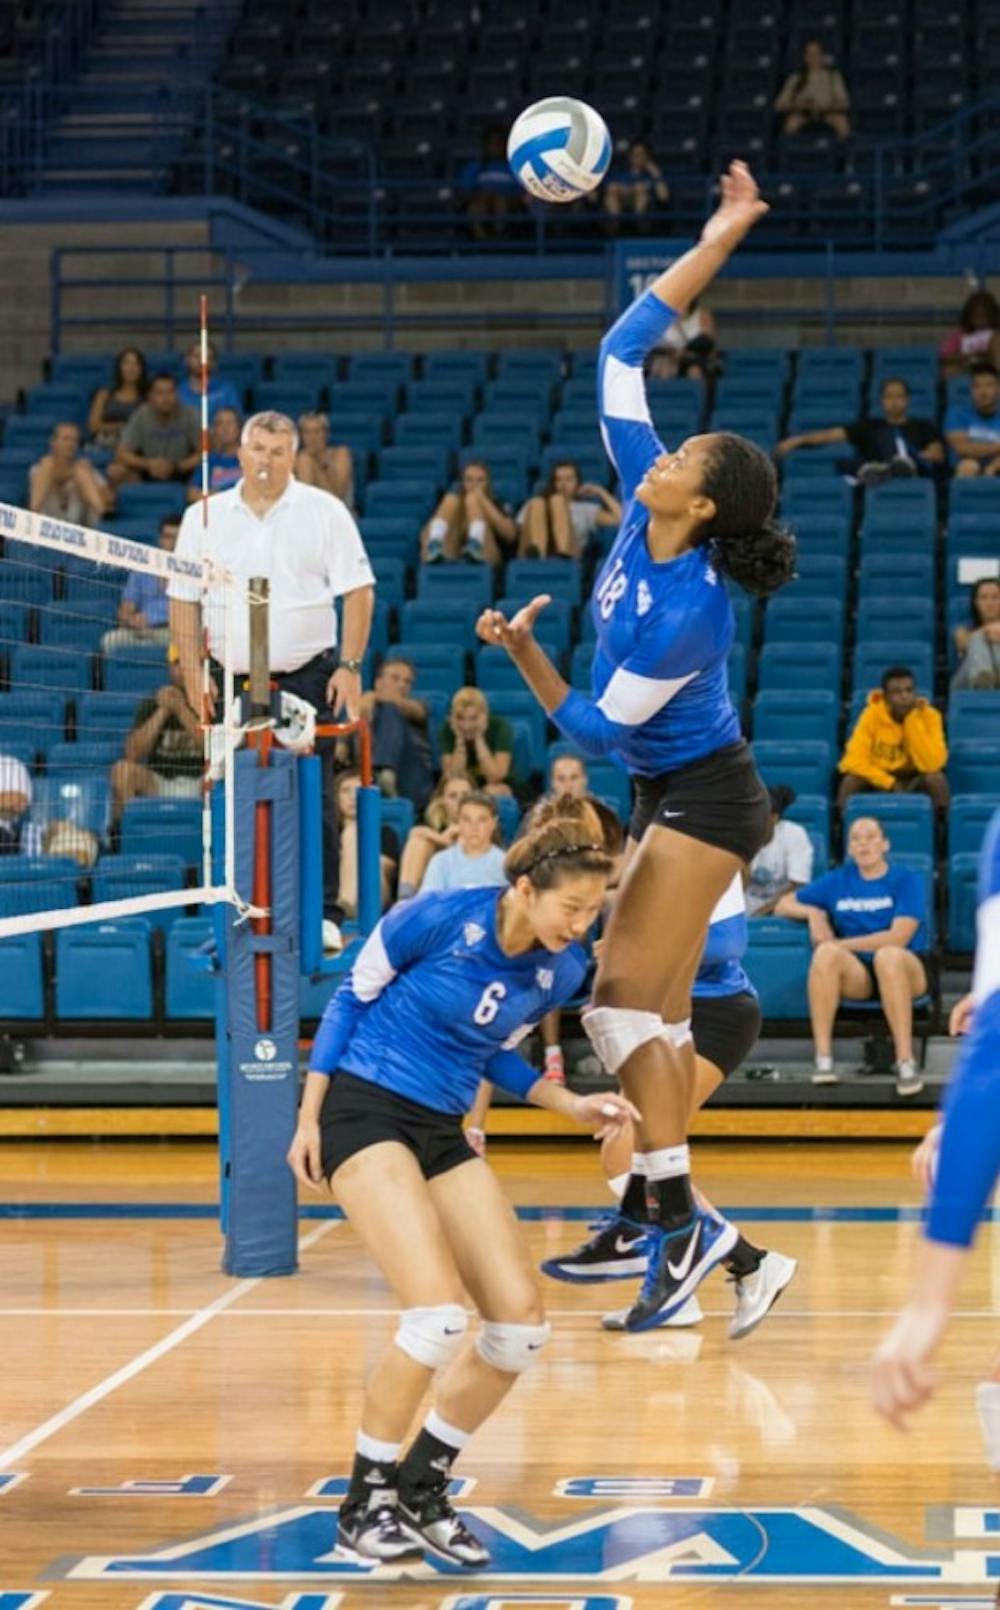 Junior outside hitter Tahleia Bishop spikes the ball during the UB Invite this weekend at Alumni Arena. The Bulls went 2-2 to open the season. Wenyi Yang, The Spectrum